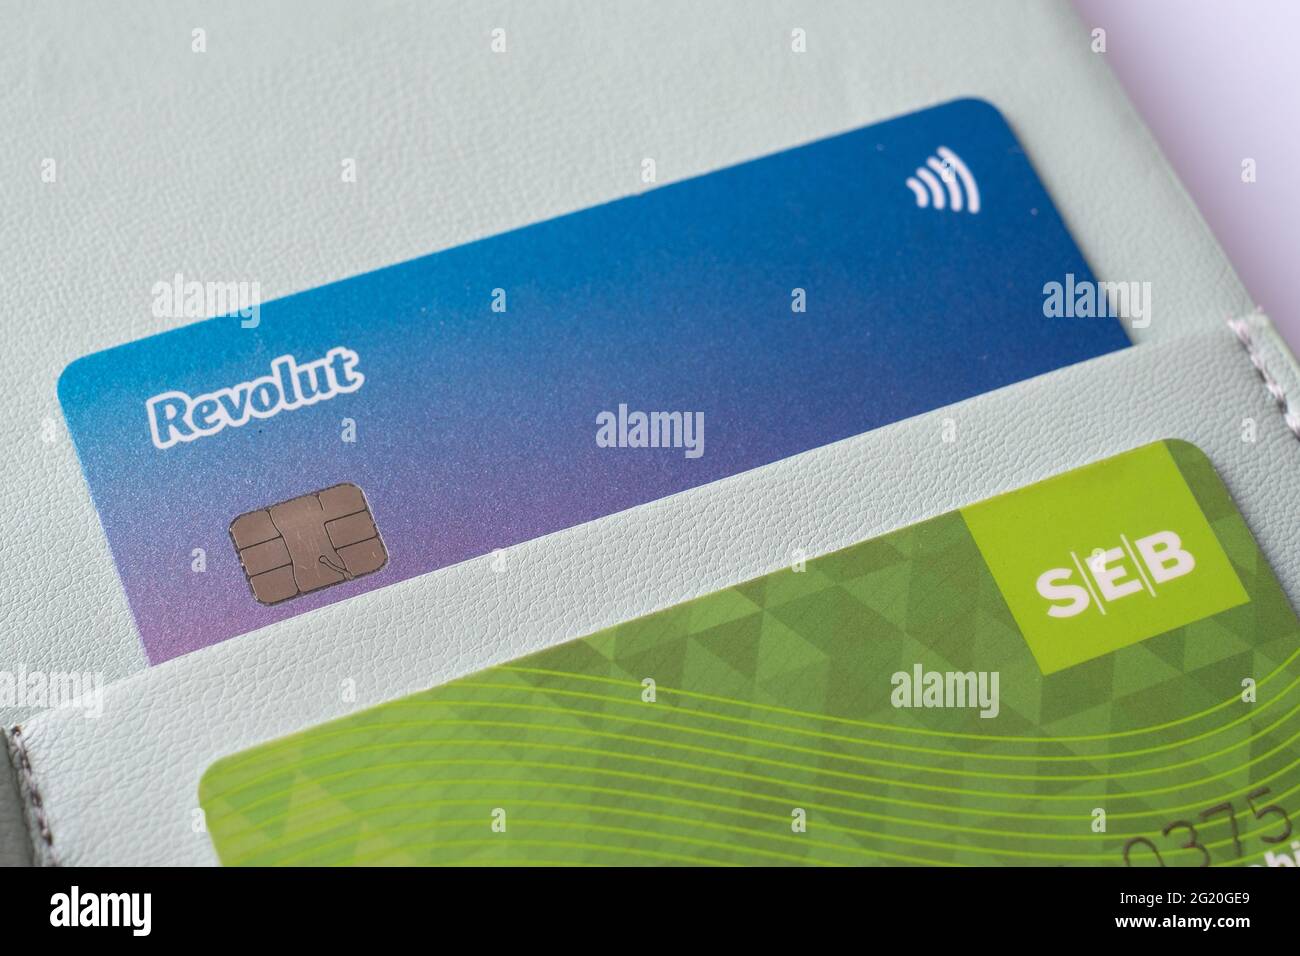 SEB - Swedish bank founded and controlled by the Swedish Wallenberg family. Revolut - UK based financial technology company. Stock Photo